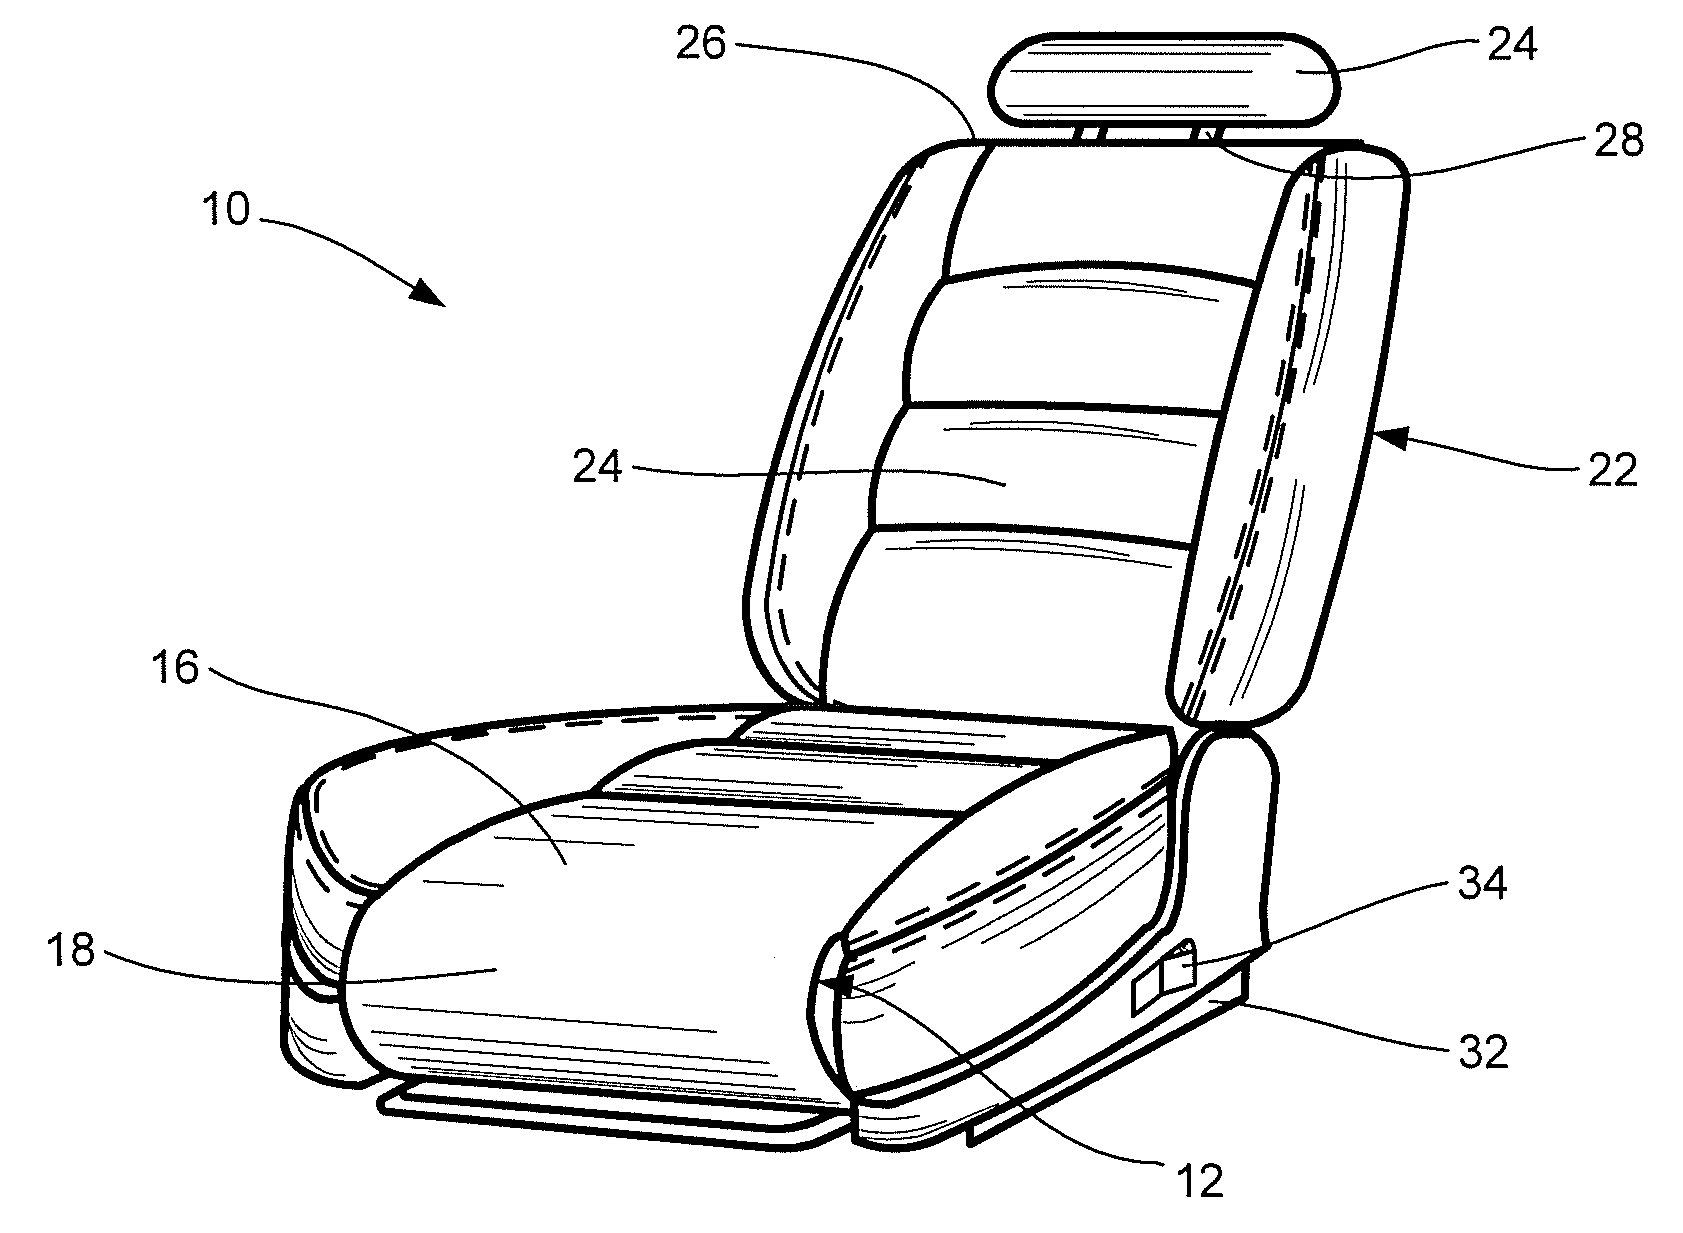 Vehicular seat with adjustable thigh support